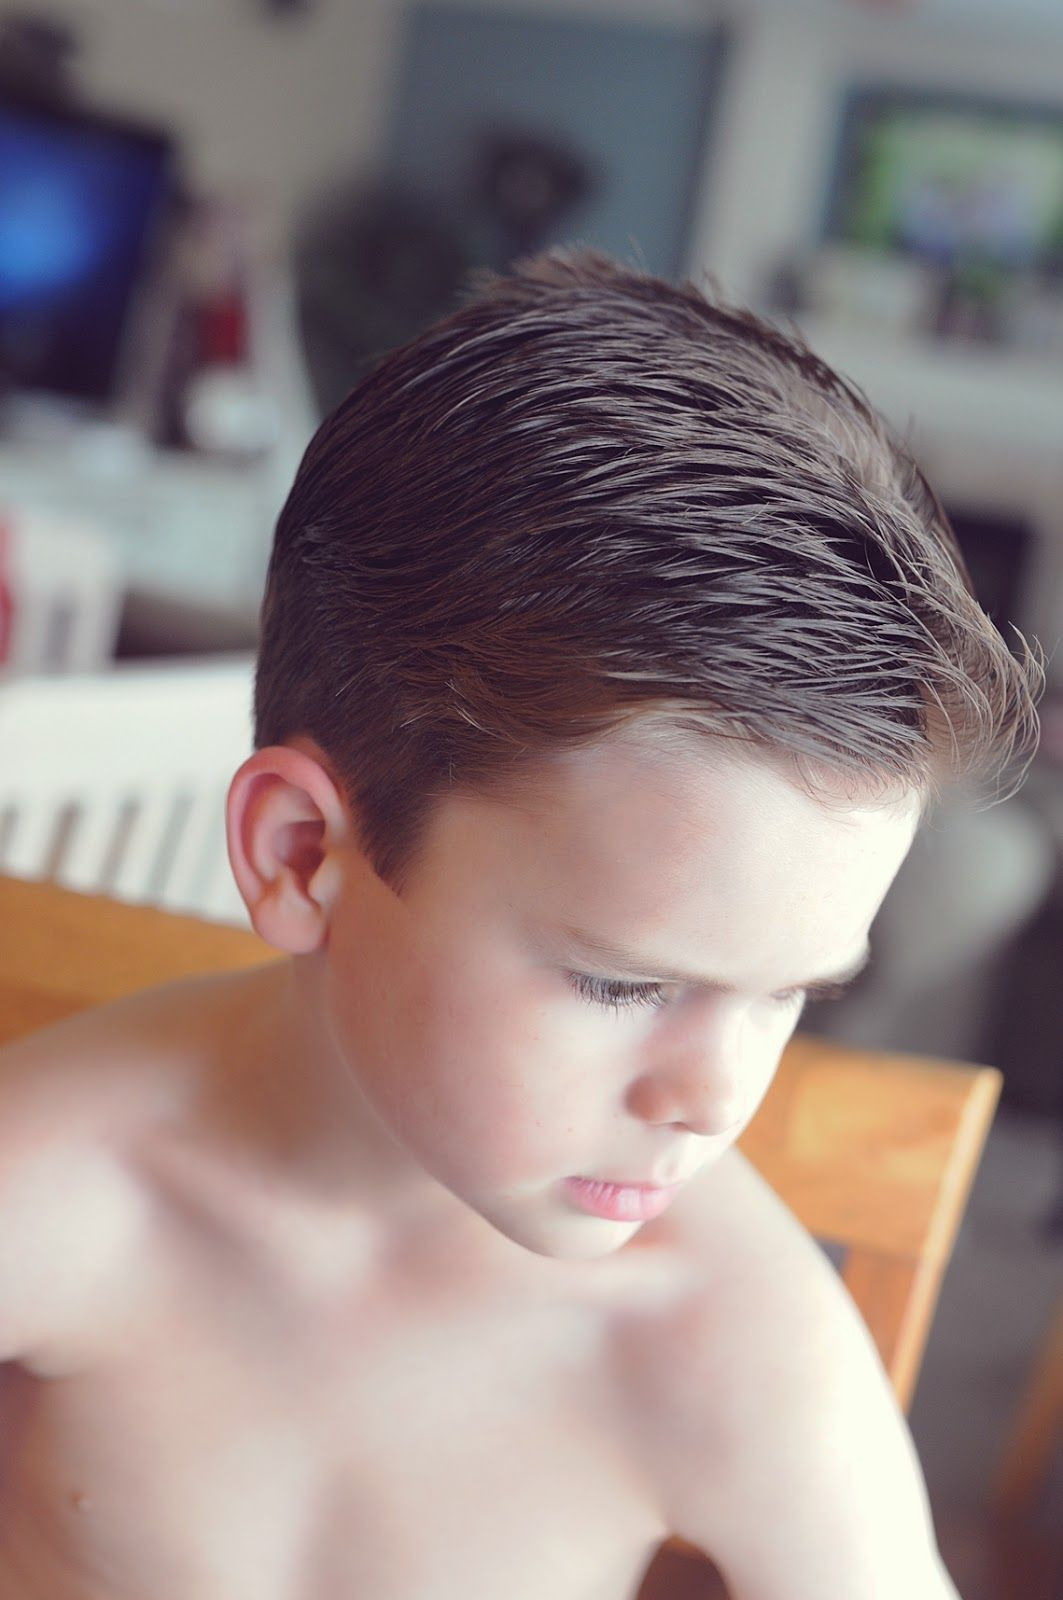 How To Cut Boys Hair With Scissors
 Pin on Baby J